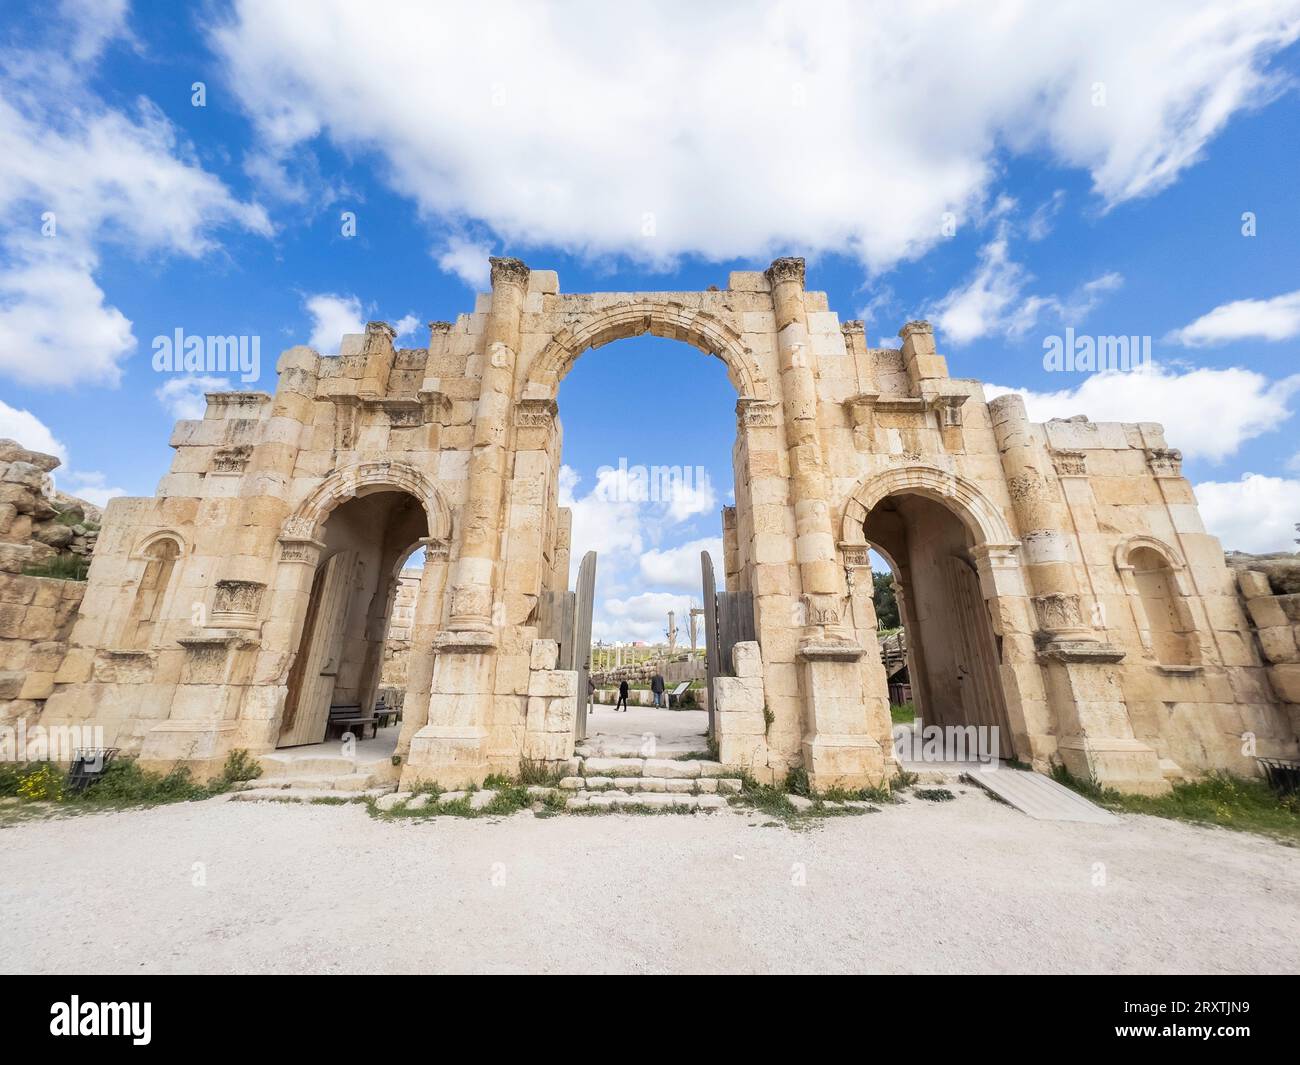 The inner entrance to the Oval Plaza, believed to have been founded in 331 BC by Alexander the Great, Jerash, Jordan, Middle East Stock Photo